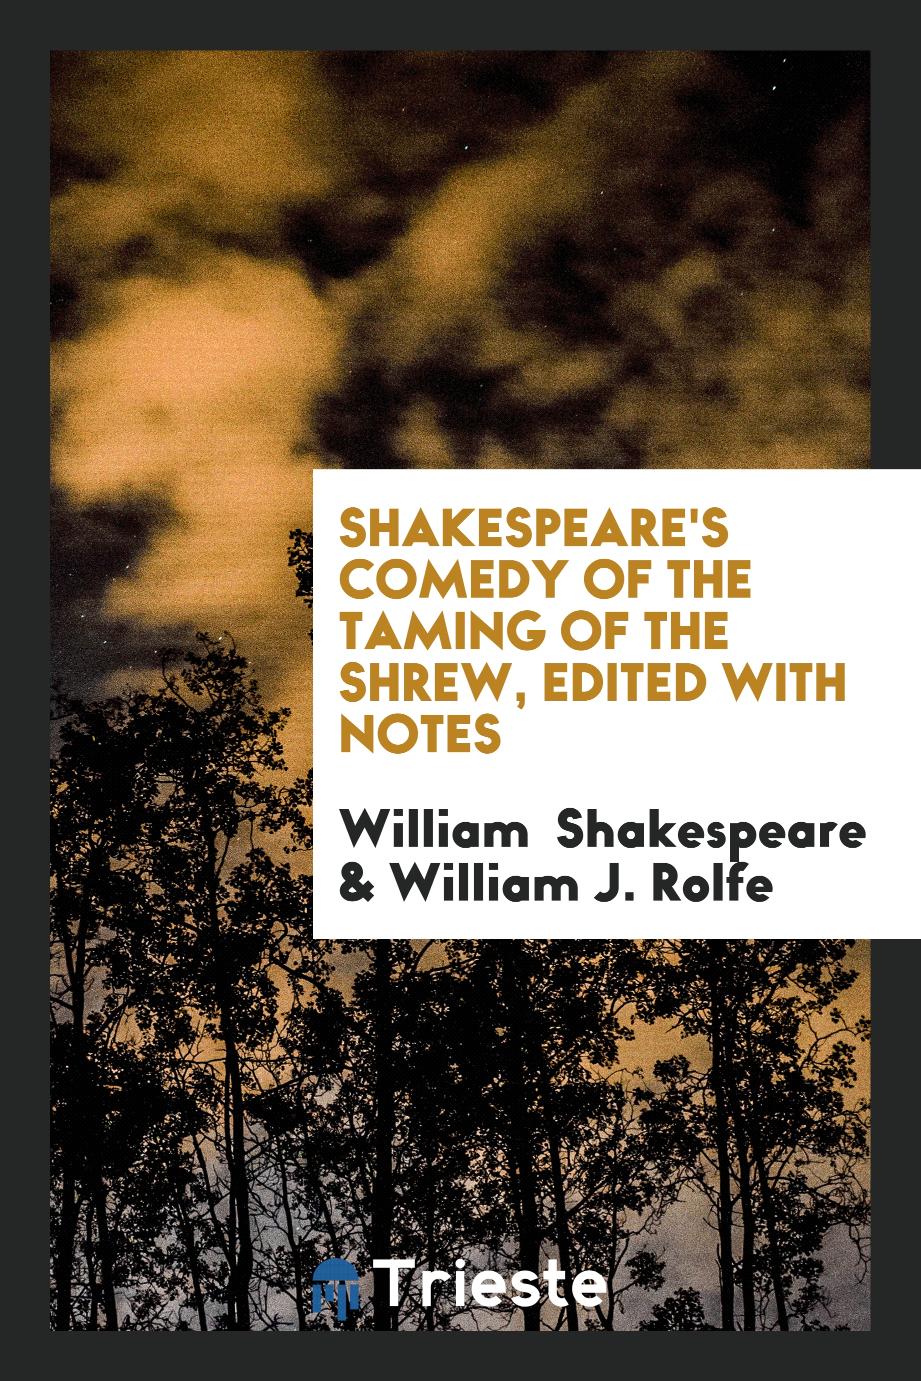 Shakespeare's Comedy of the Taming of the Shrew, Edited with Notes